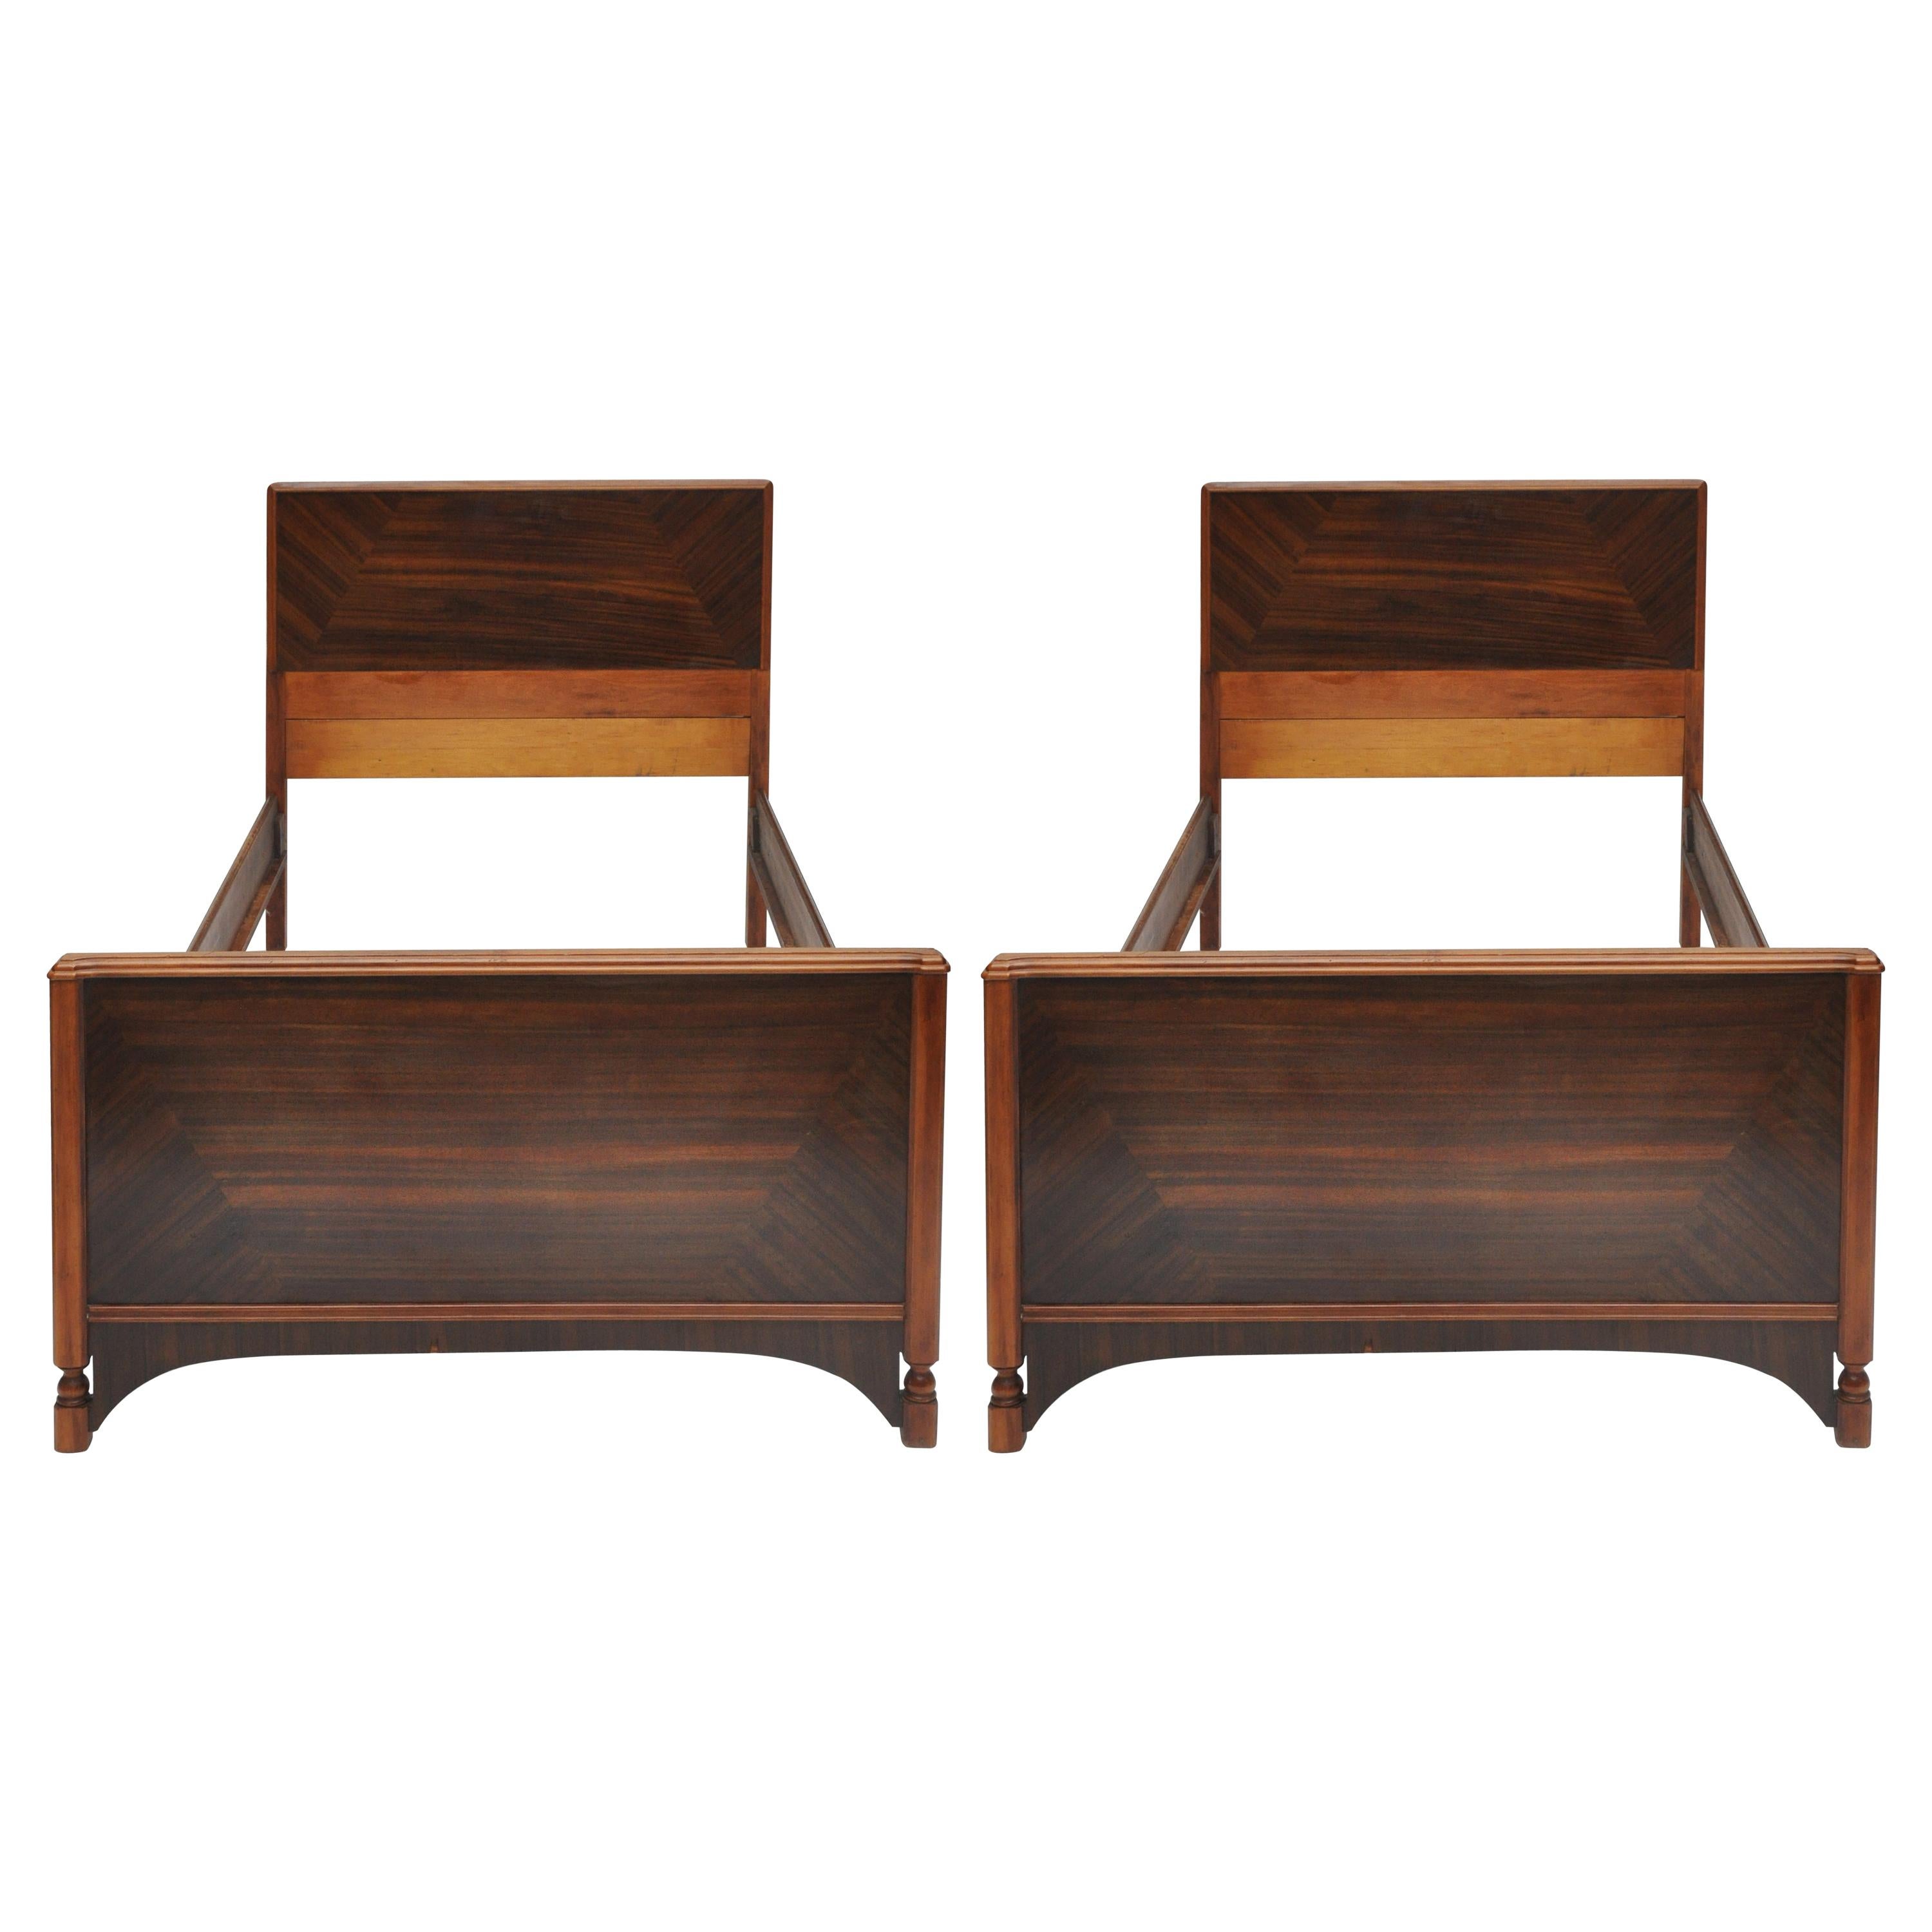 Pair of Mid-Century Modern Twin Beds